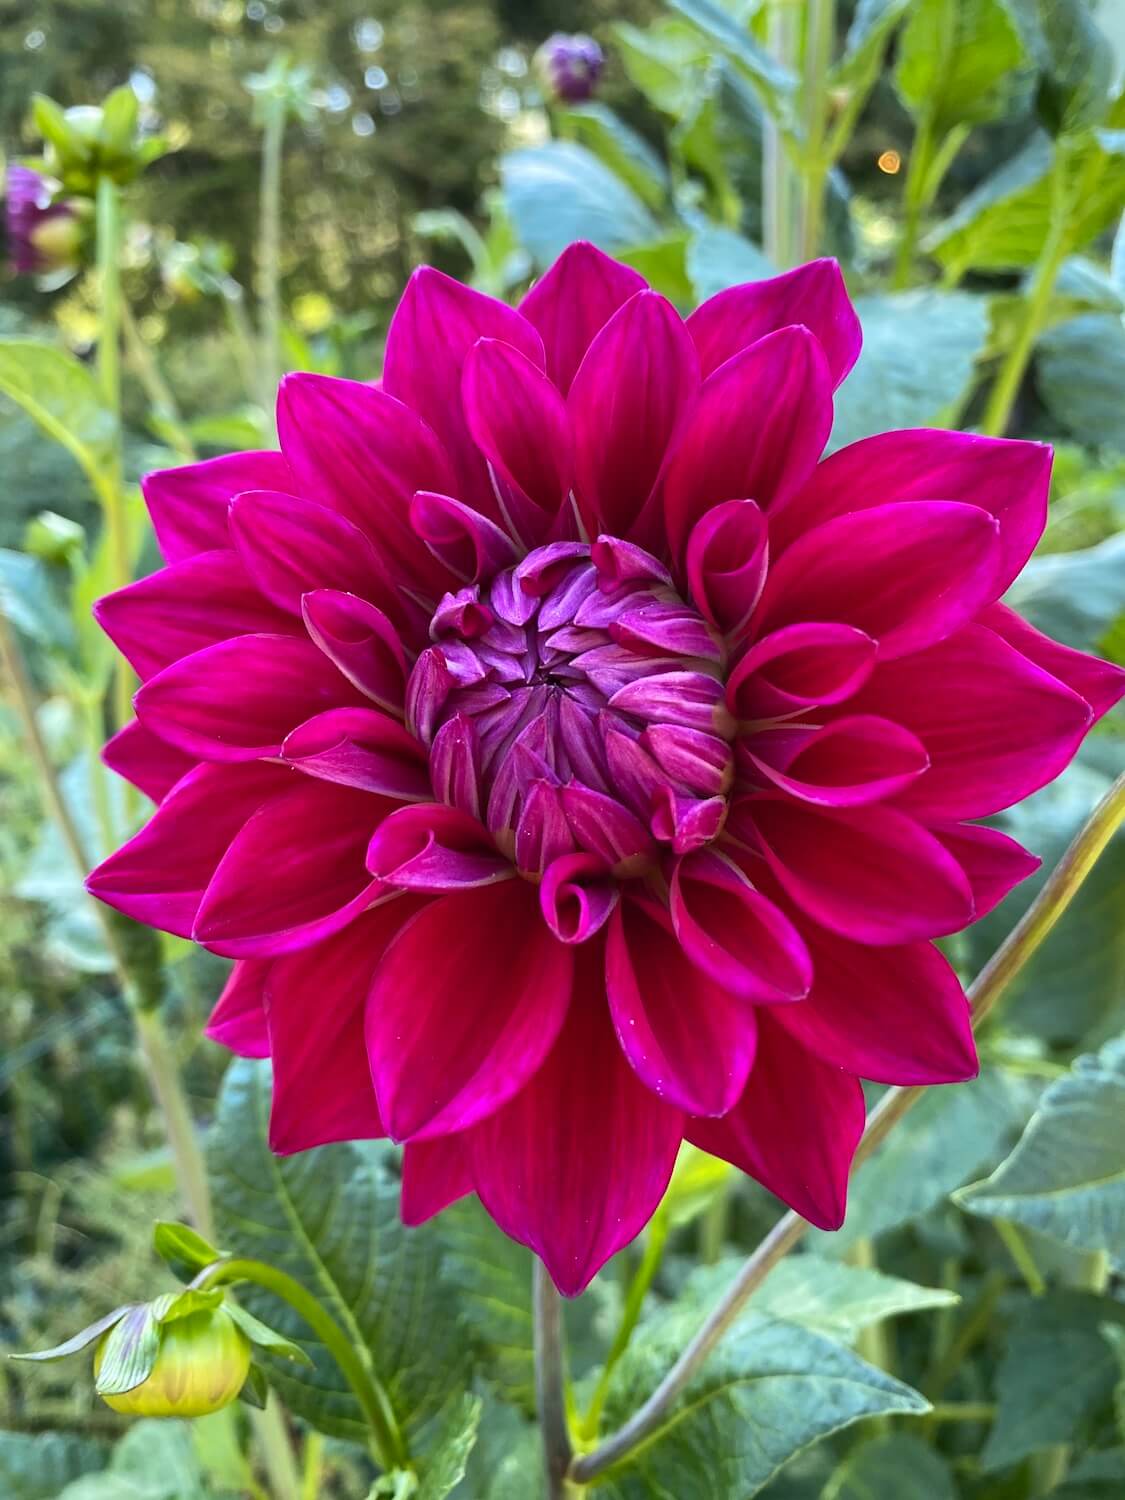 A beautiful bold dahlia comes to like in a garden during the summer season in Seattle.  The background is out of focus green plant foliage. 